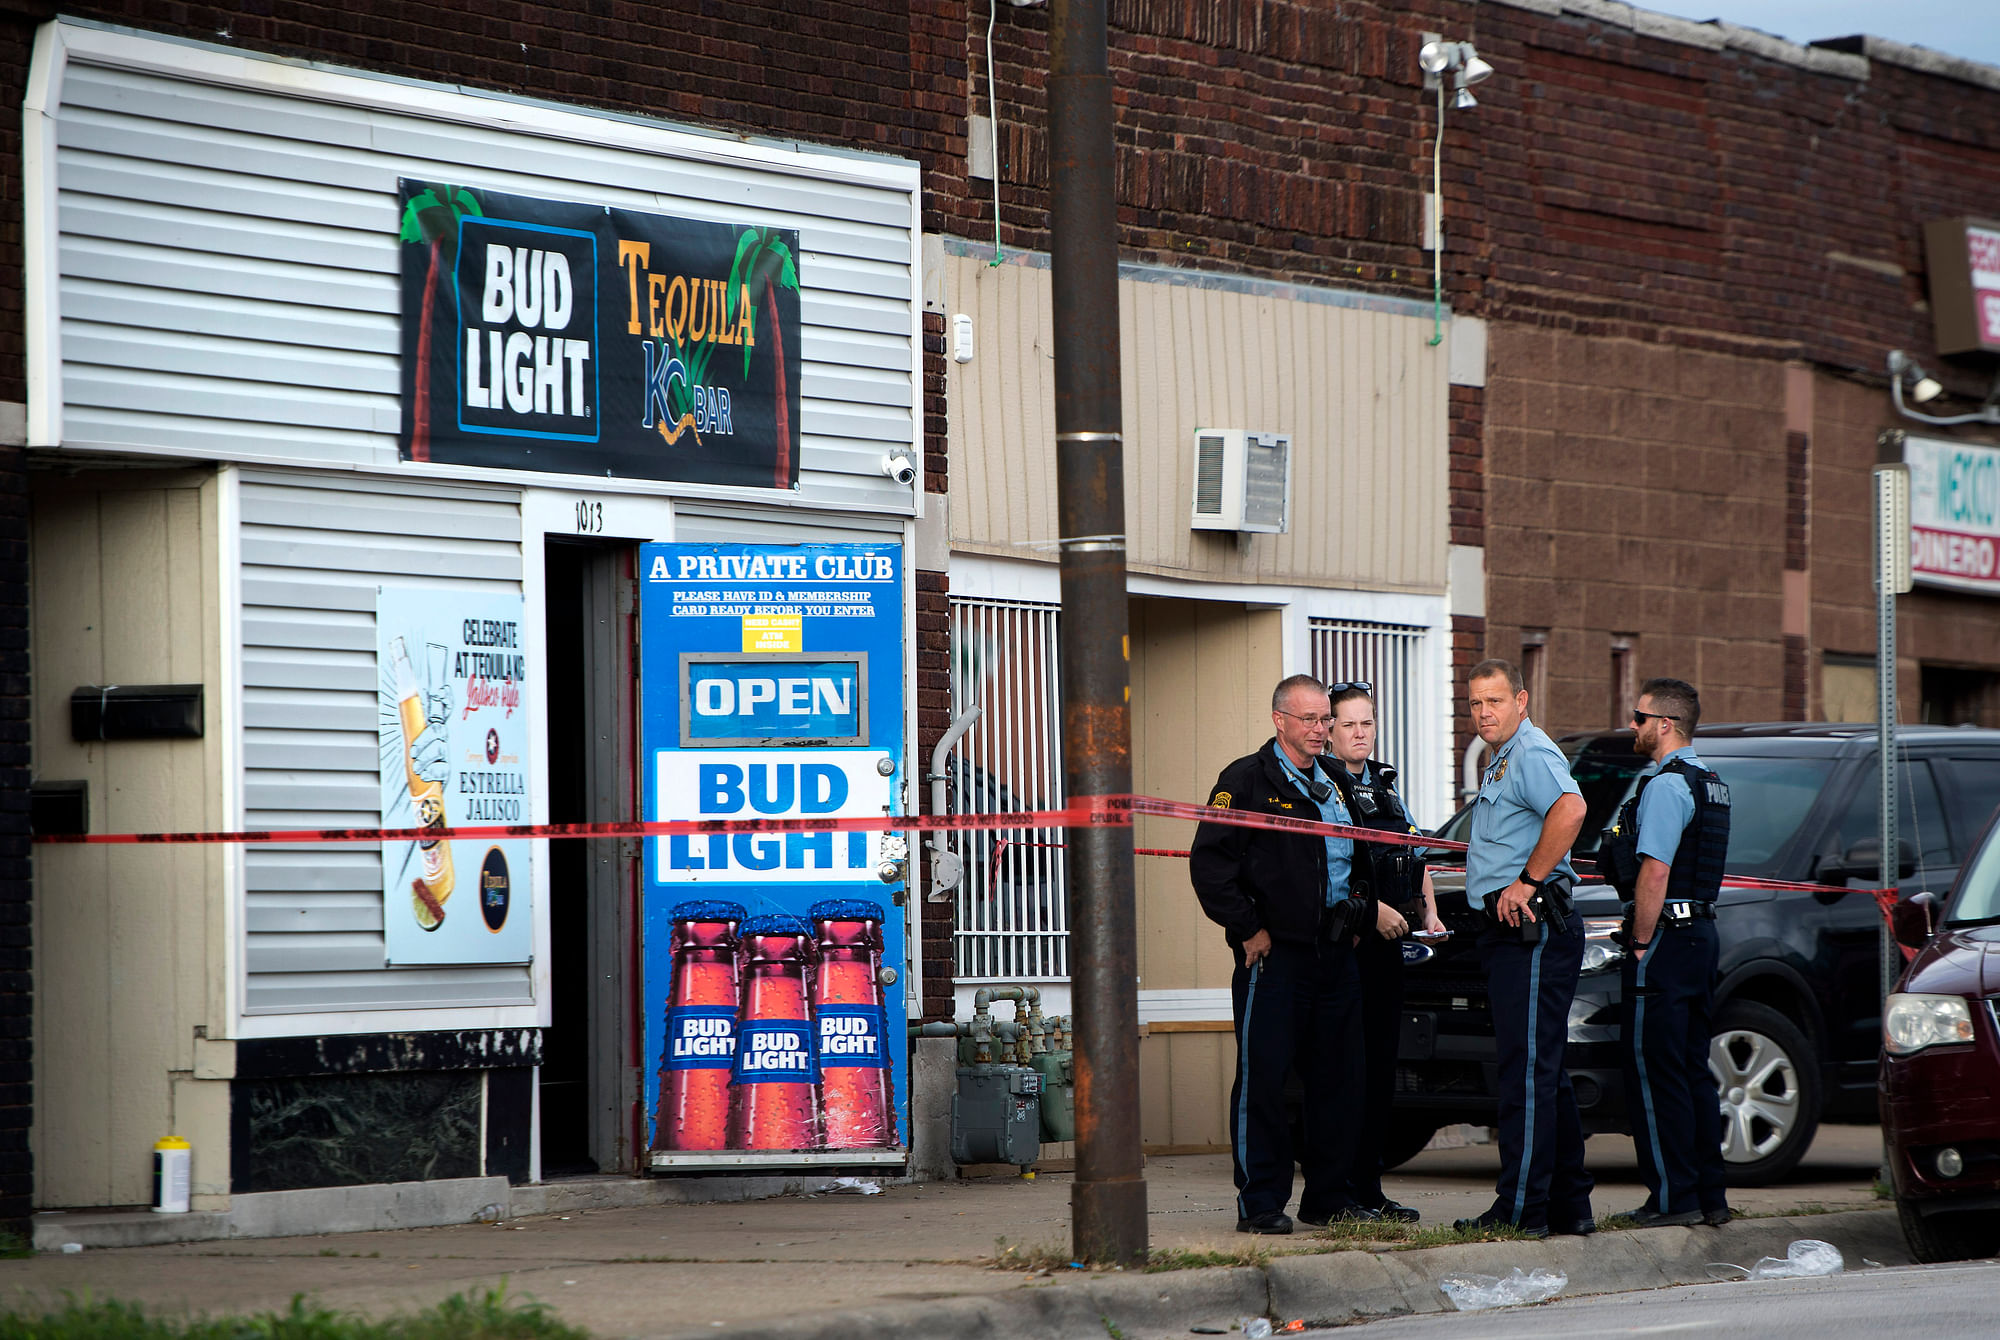 Police investigate the scene of a shooting at Tequila KC Bar on Sunday, 6 October, in Kansas City, Kansas.